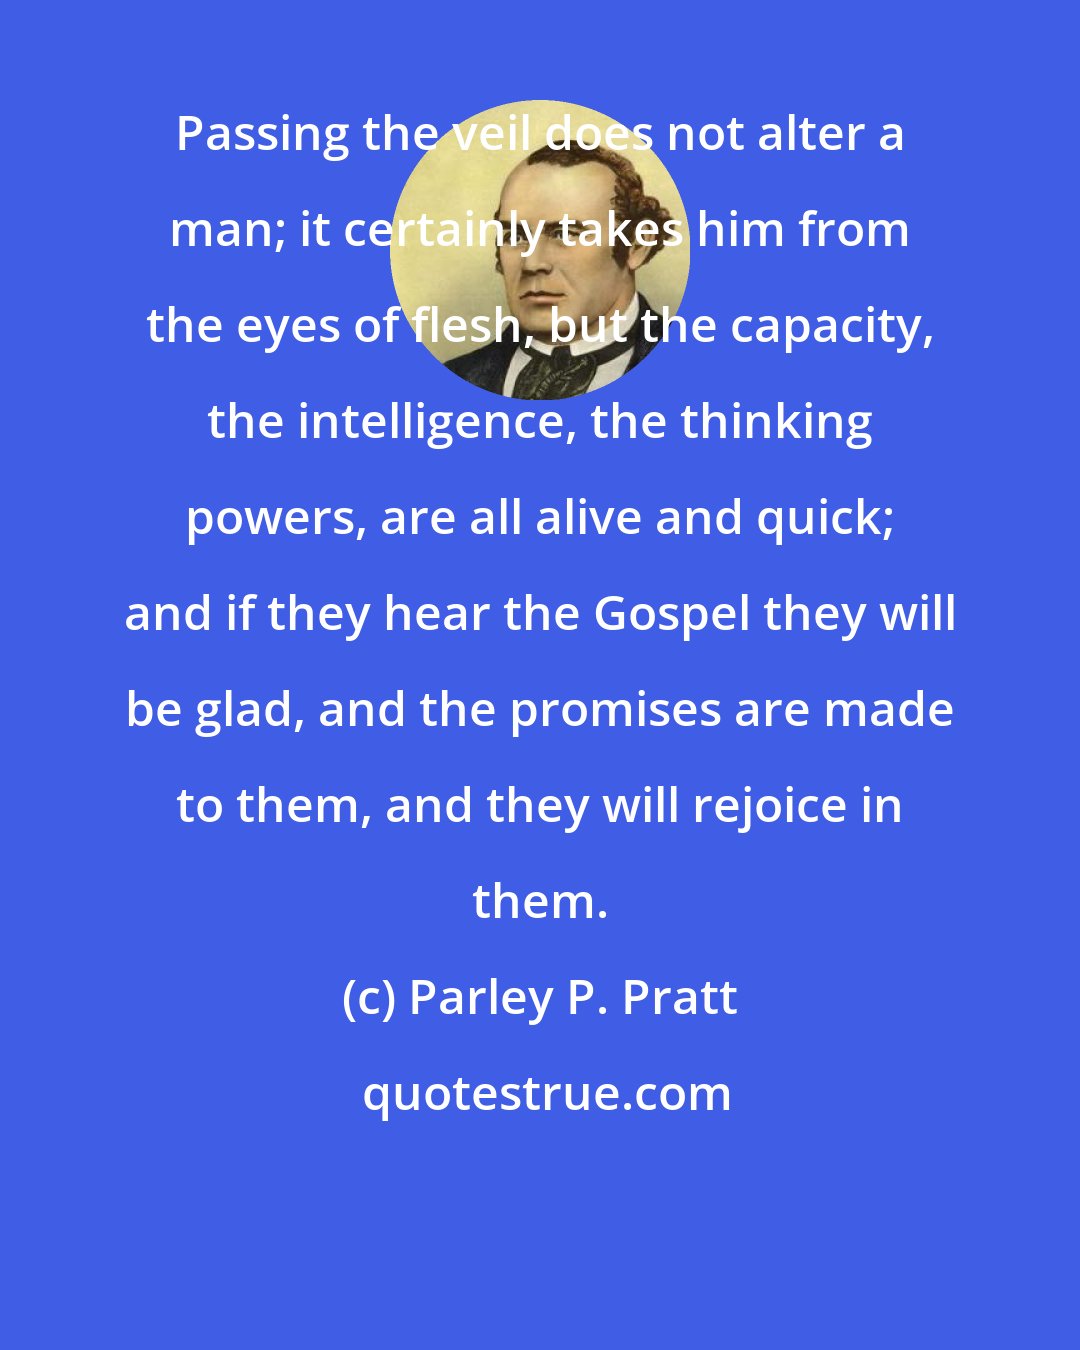 Parley P. Pratt: Passing the veil does not alter a man; it certainly takes him from the eyes of flesh, but the capacity, the intelligence, the thinking powers, are all alive and quick; and if they hear the Gospel they will be glad, and the promises are made to them, and they will rejoice in them.